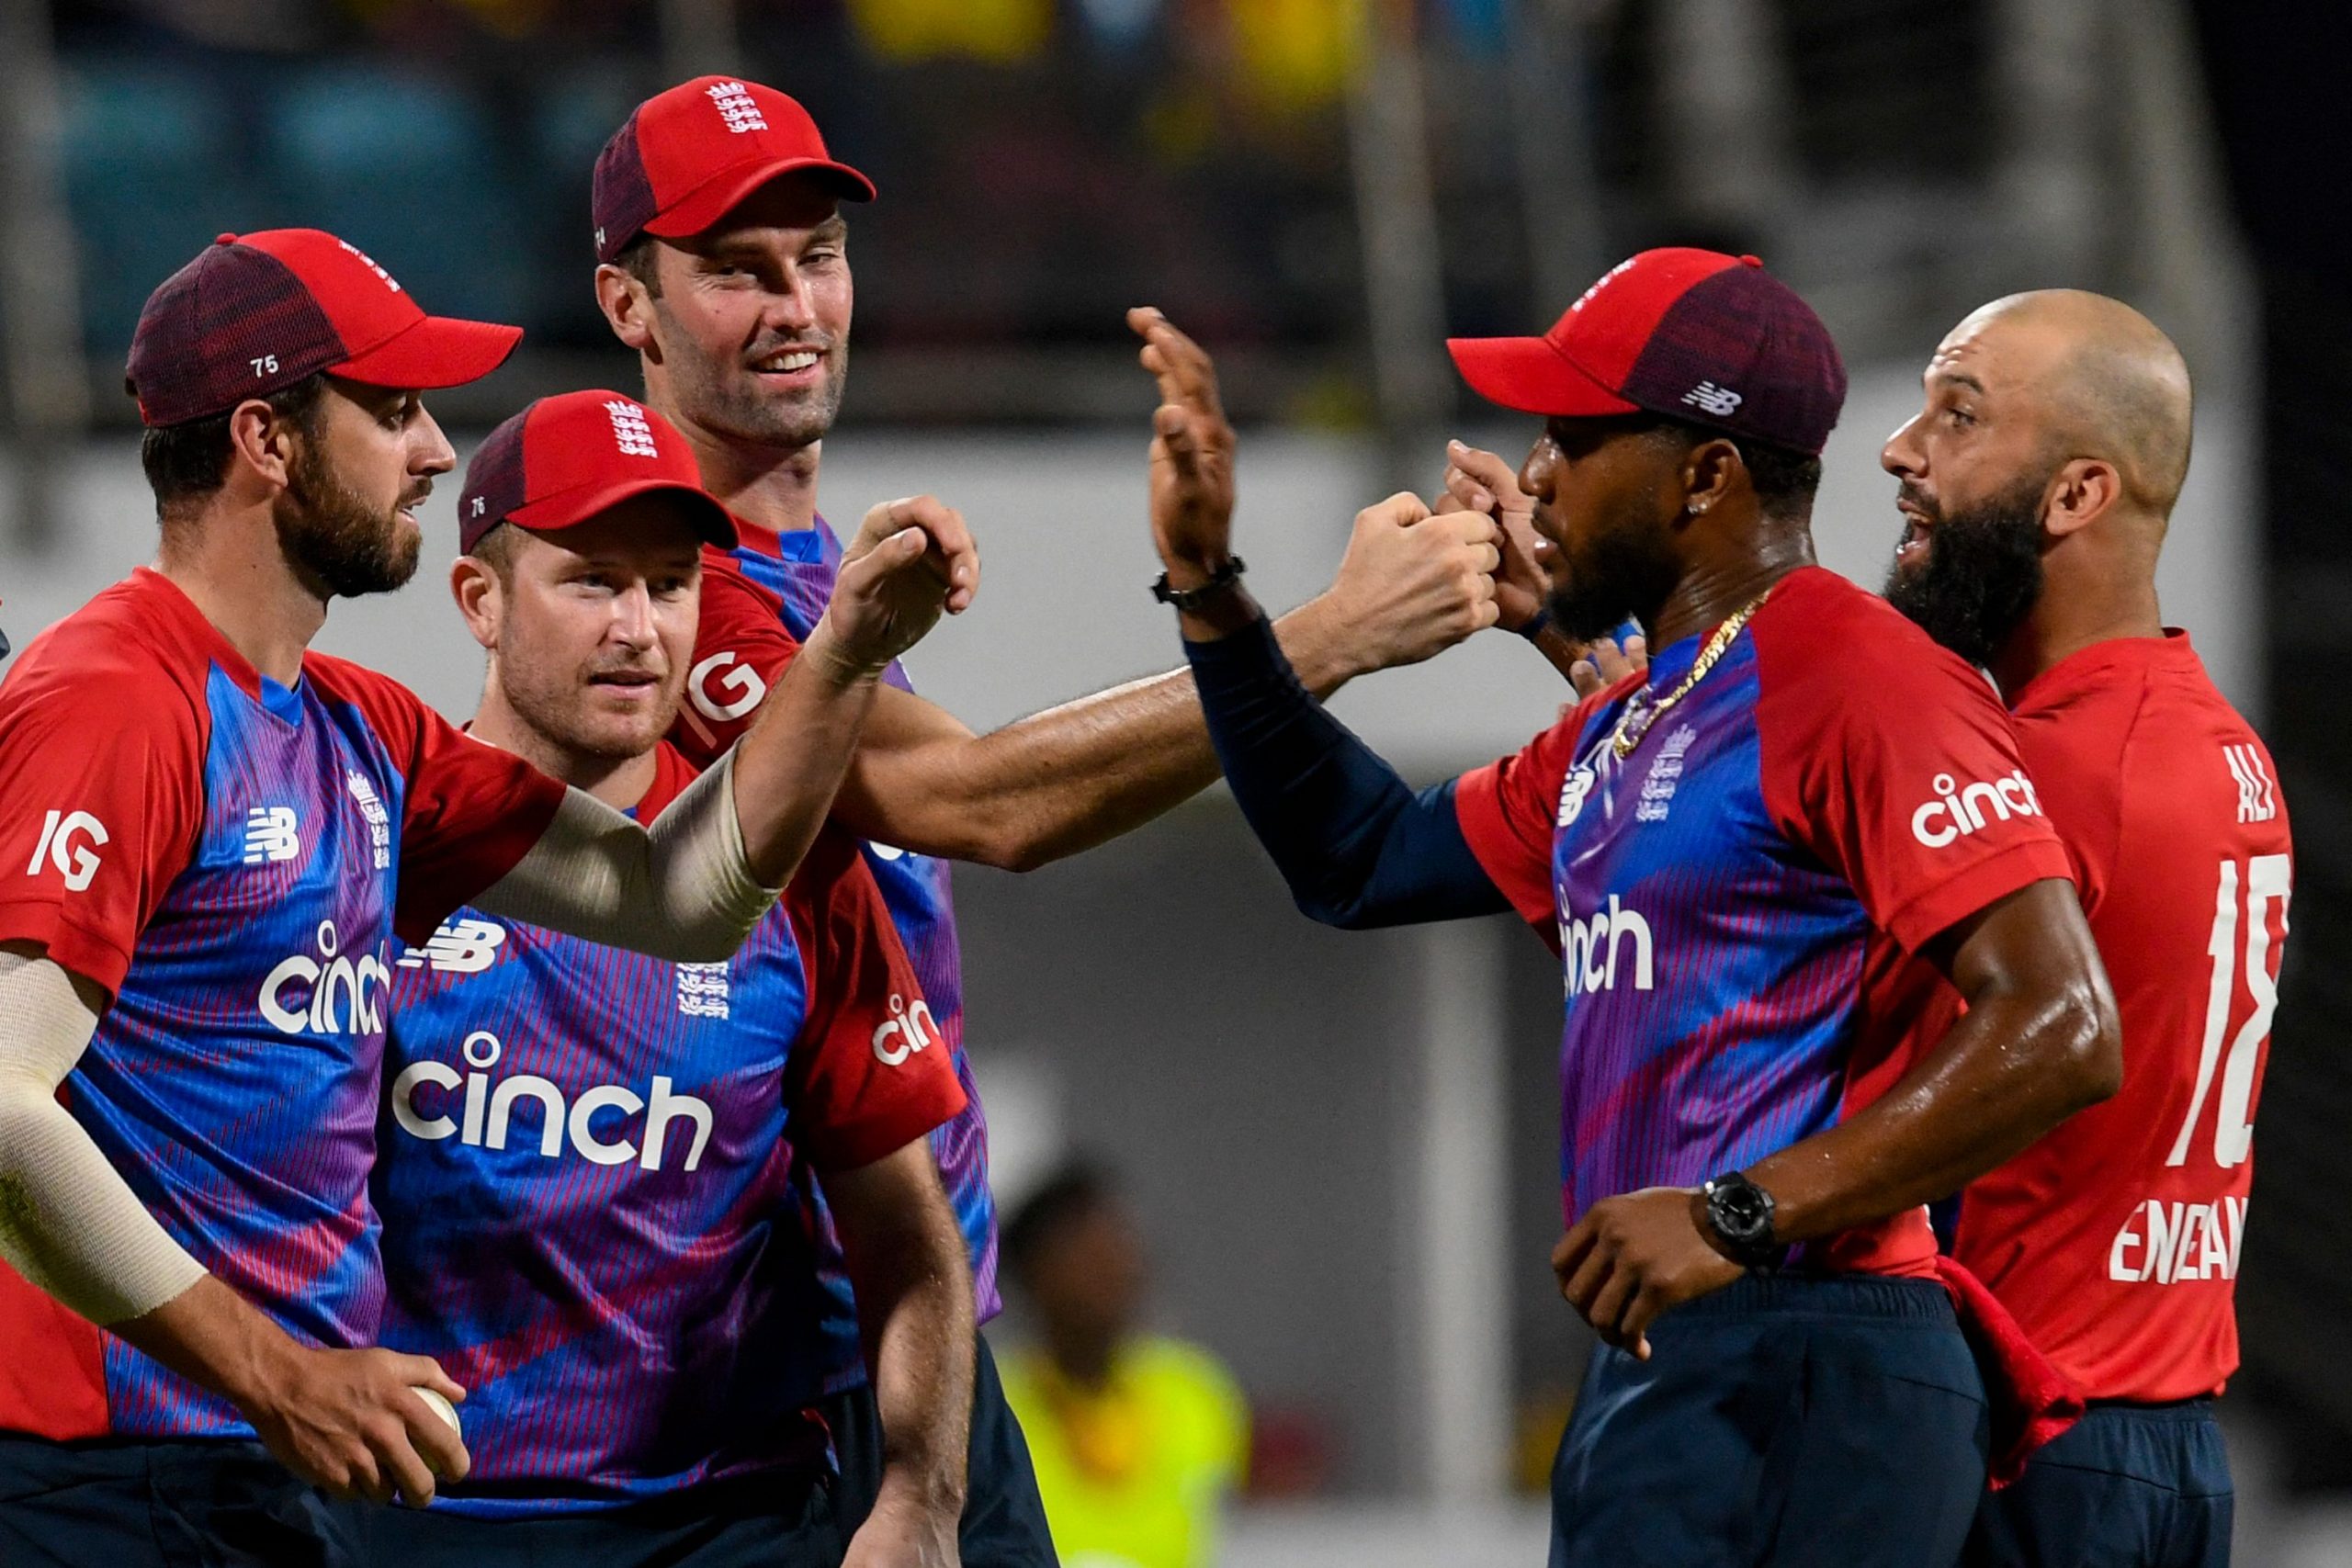 2nd T20I: England beat West Indies in 1-run thriller, series tied at 1-1